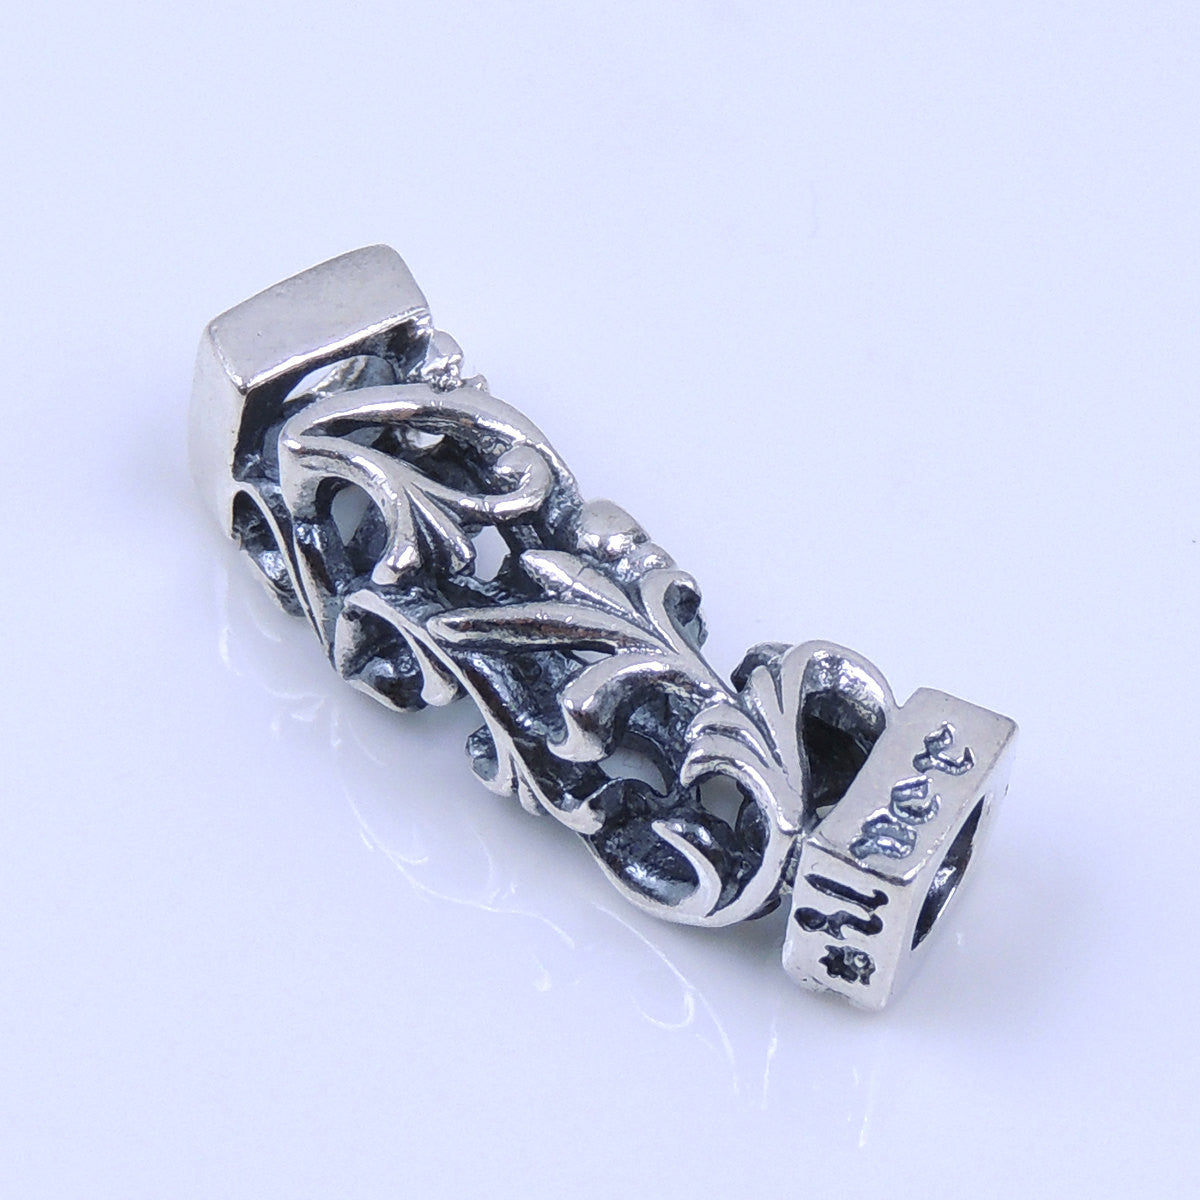 2 PCS Engraved Ornate Floral Celtic Charms - S925 Sterling Silver WSP232X2